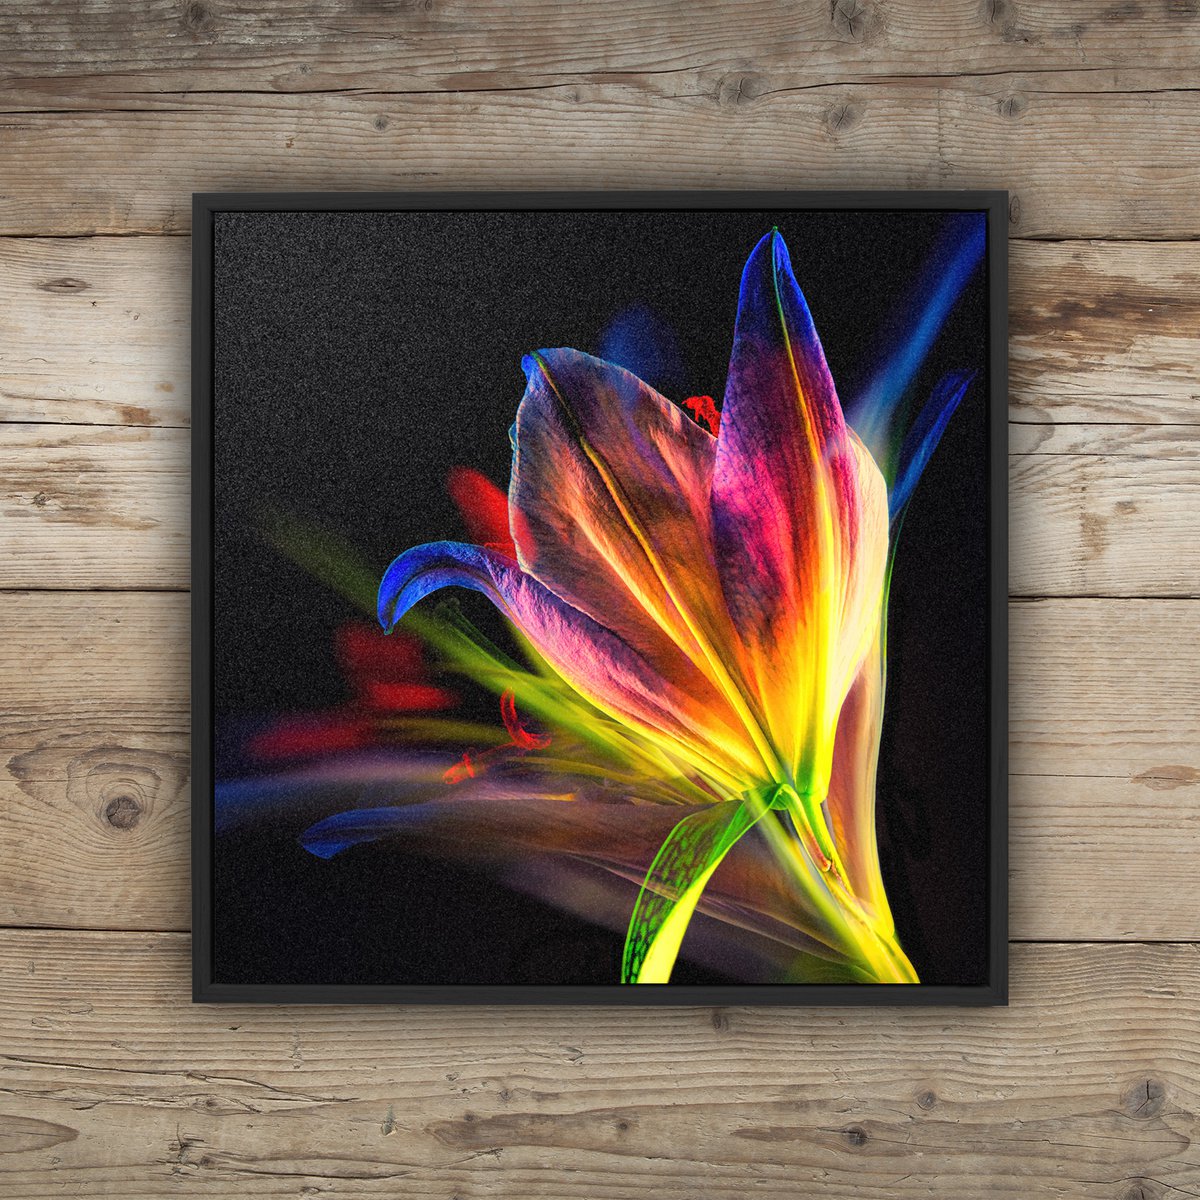 Lilies #1 Abstract Multiple Exposure Photography of Dyed Lilies Limited Edition Framed Pri... by Graham Briggs